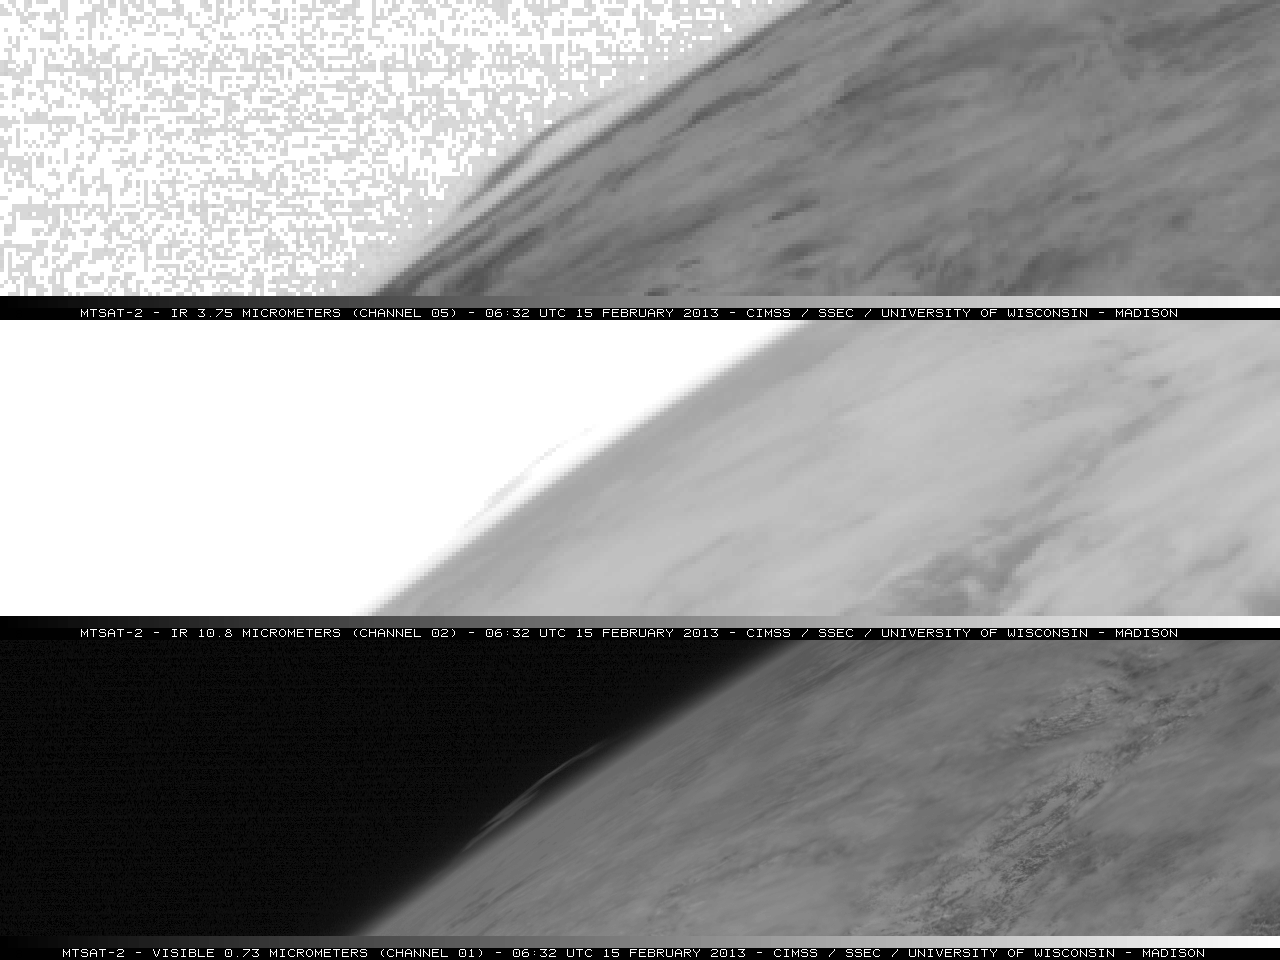 MTSAT-2 3.75 µm shortwave IR, 10.8 µm longwave IR, and 0.73 µm visible channel images (click image to play animation)